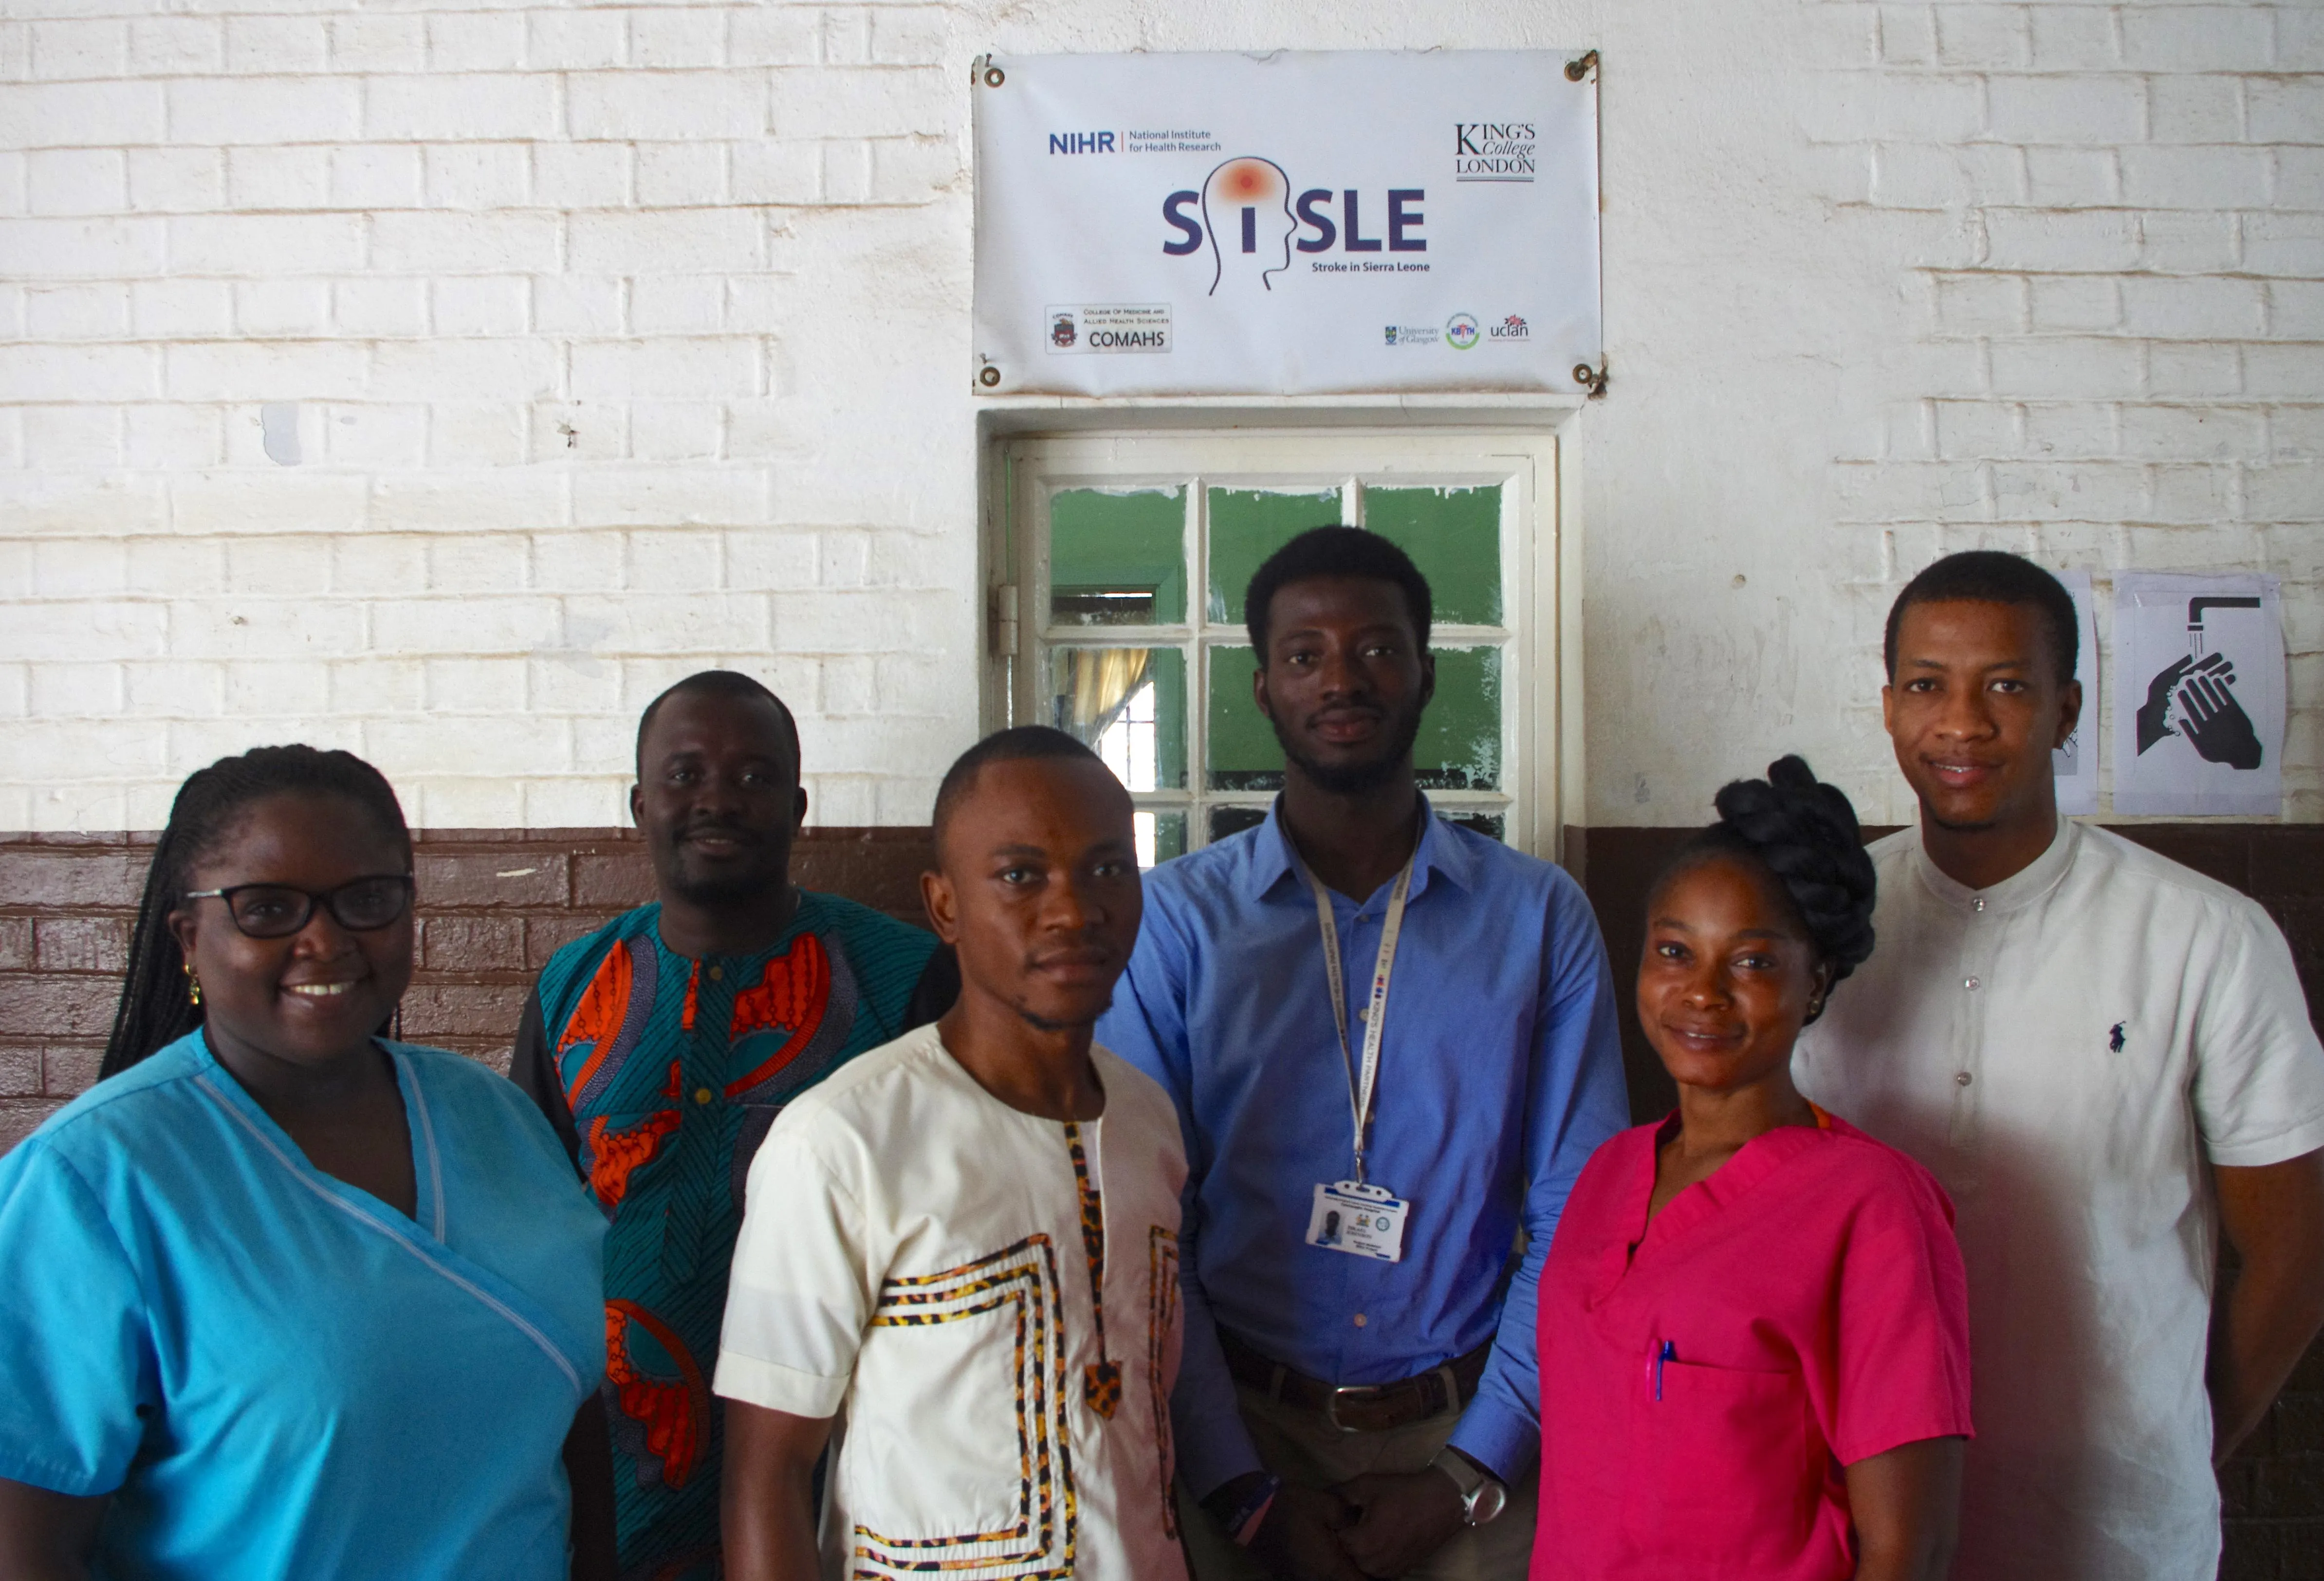 The SISLE research team in Connaught Hospital, Freetown